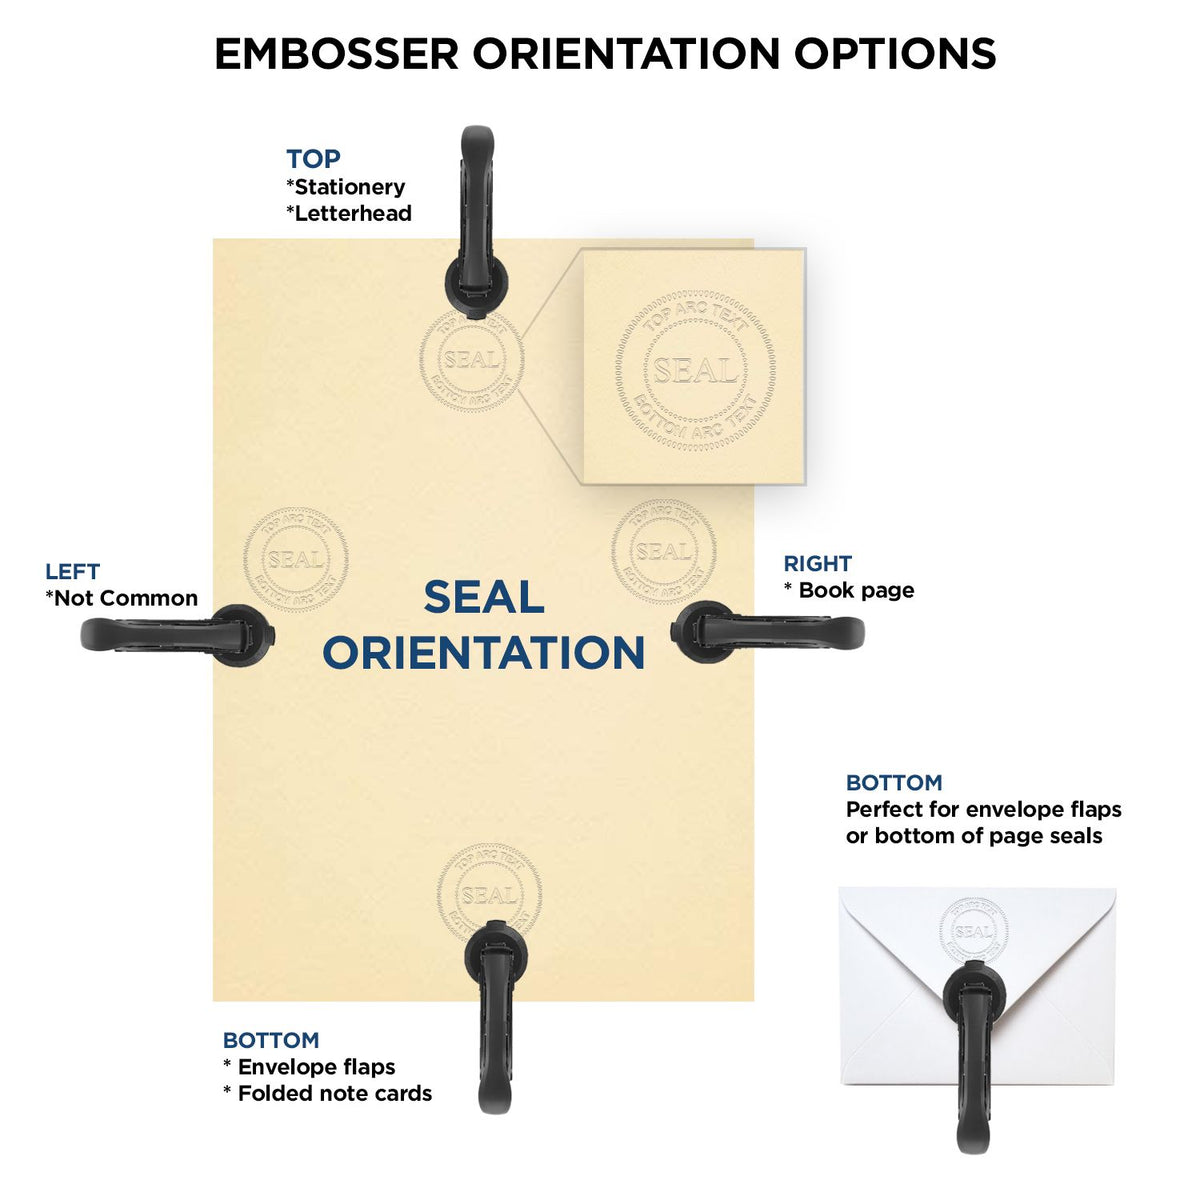 An infographic for the Heavy Duty Cast Iron New York Geologist Seal Embosser showing embosser orientation, this is showing examples of a top, bottom, right and left insert.